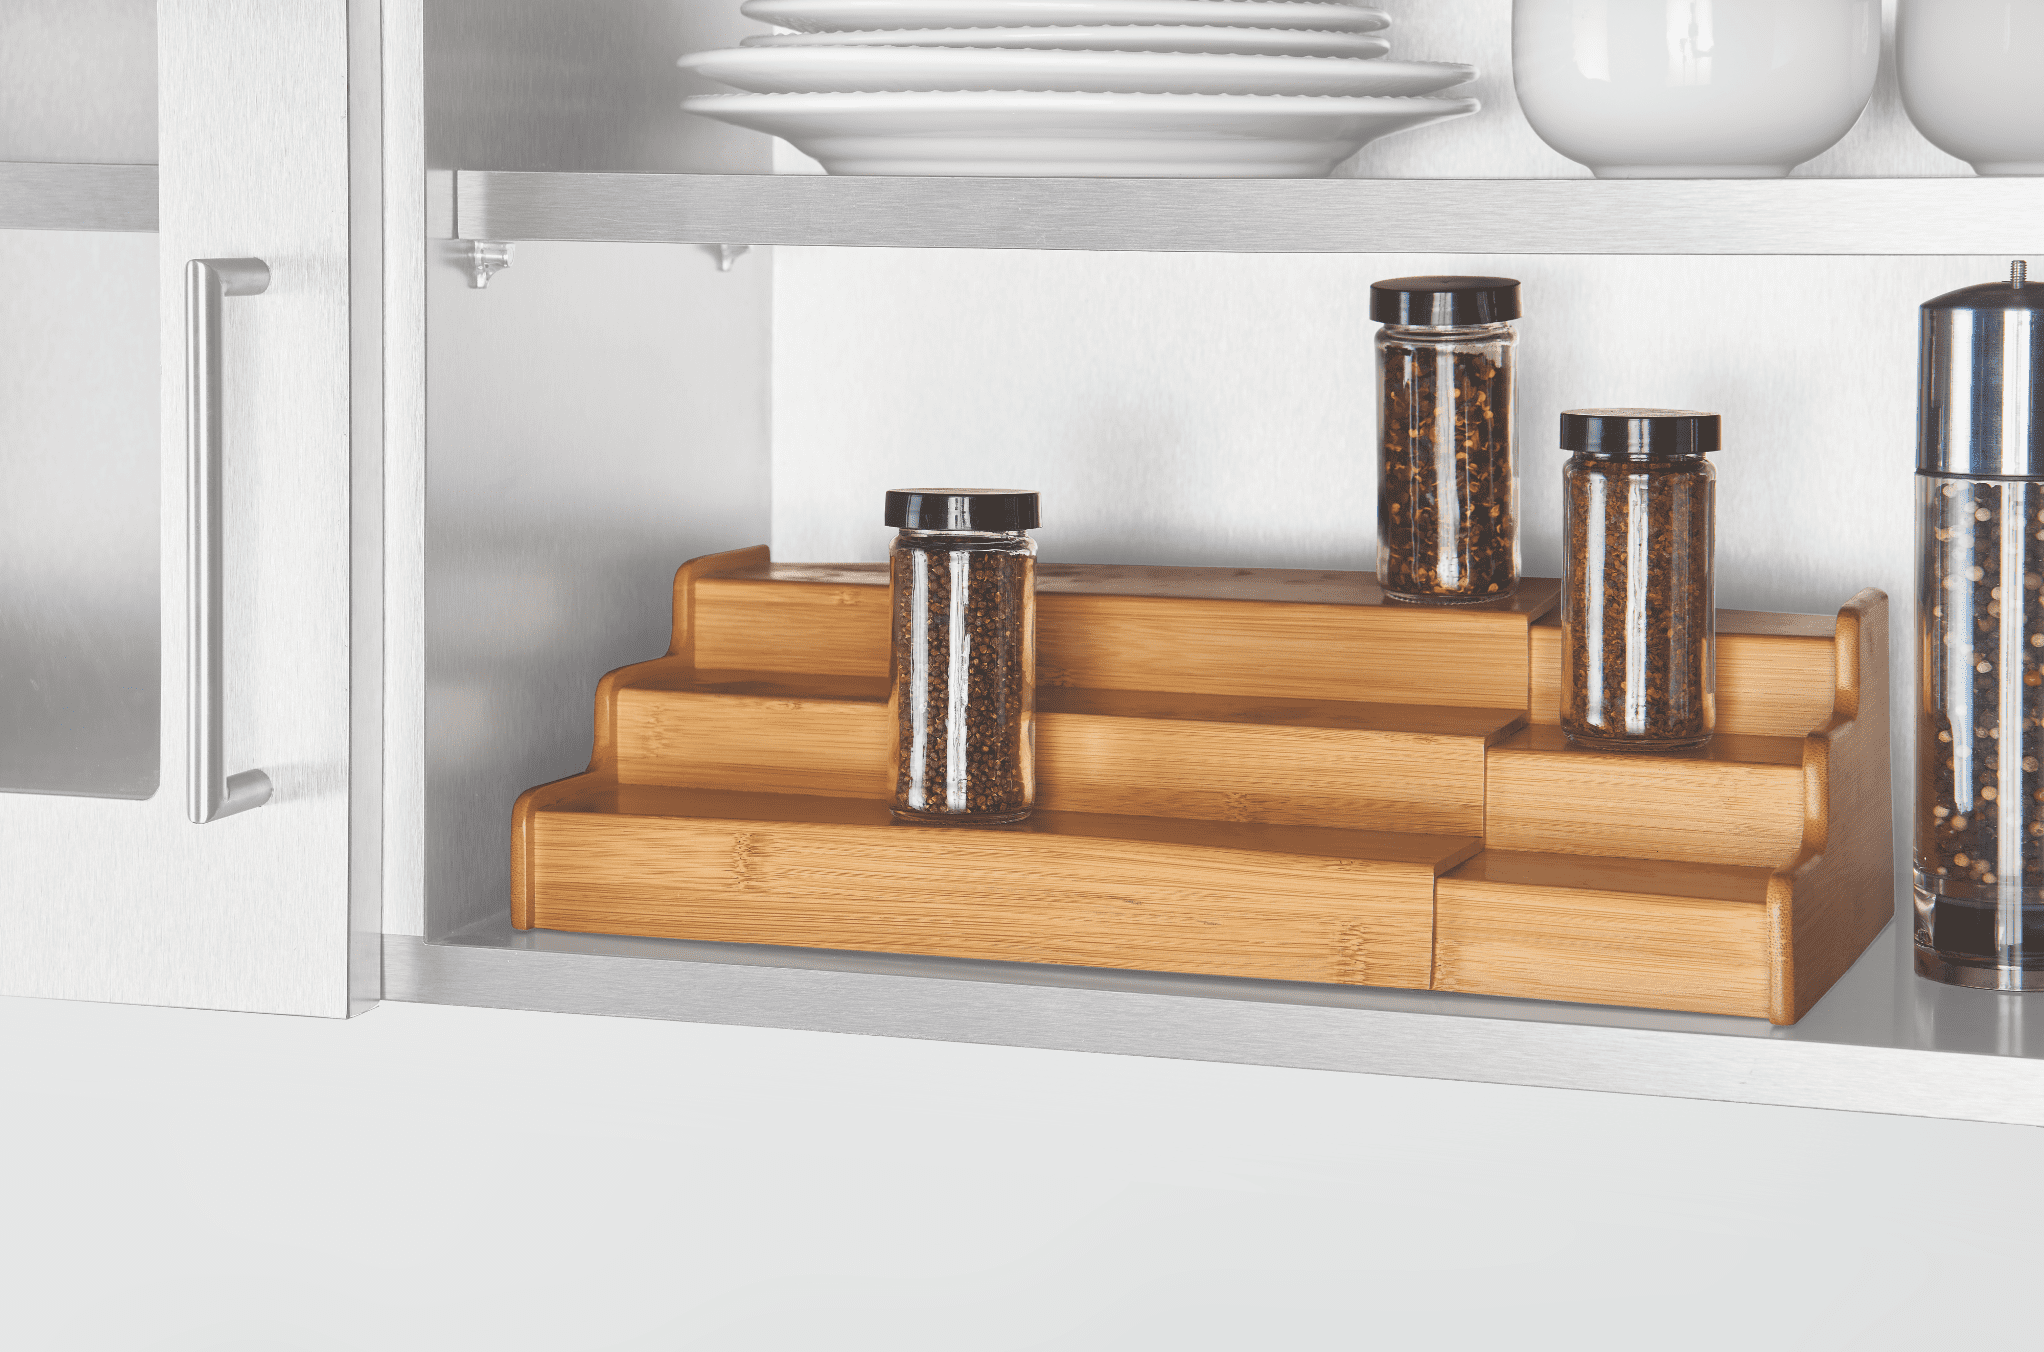 The 3 Tier Gourmet Spice Rack Is Back EBT Eligible! Who knows for how